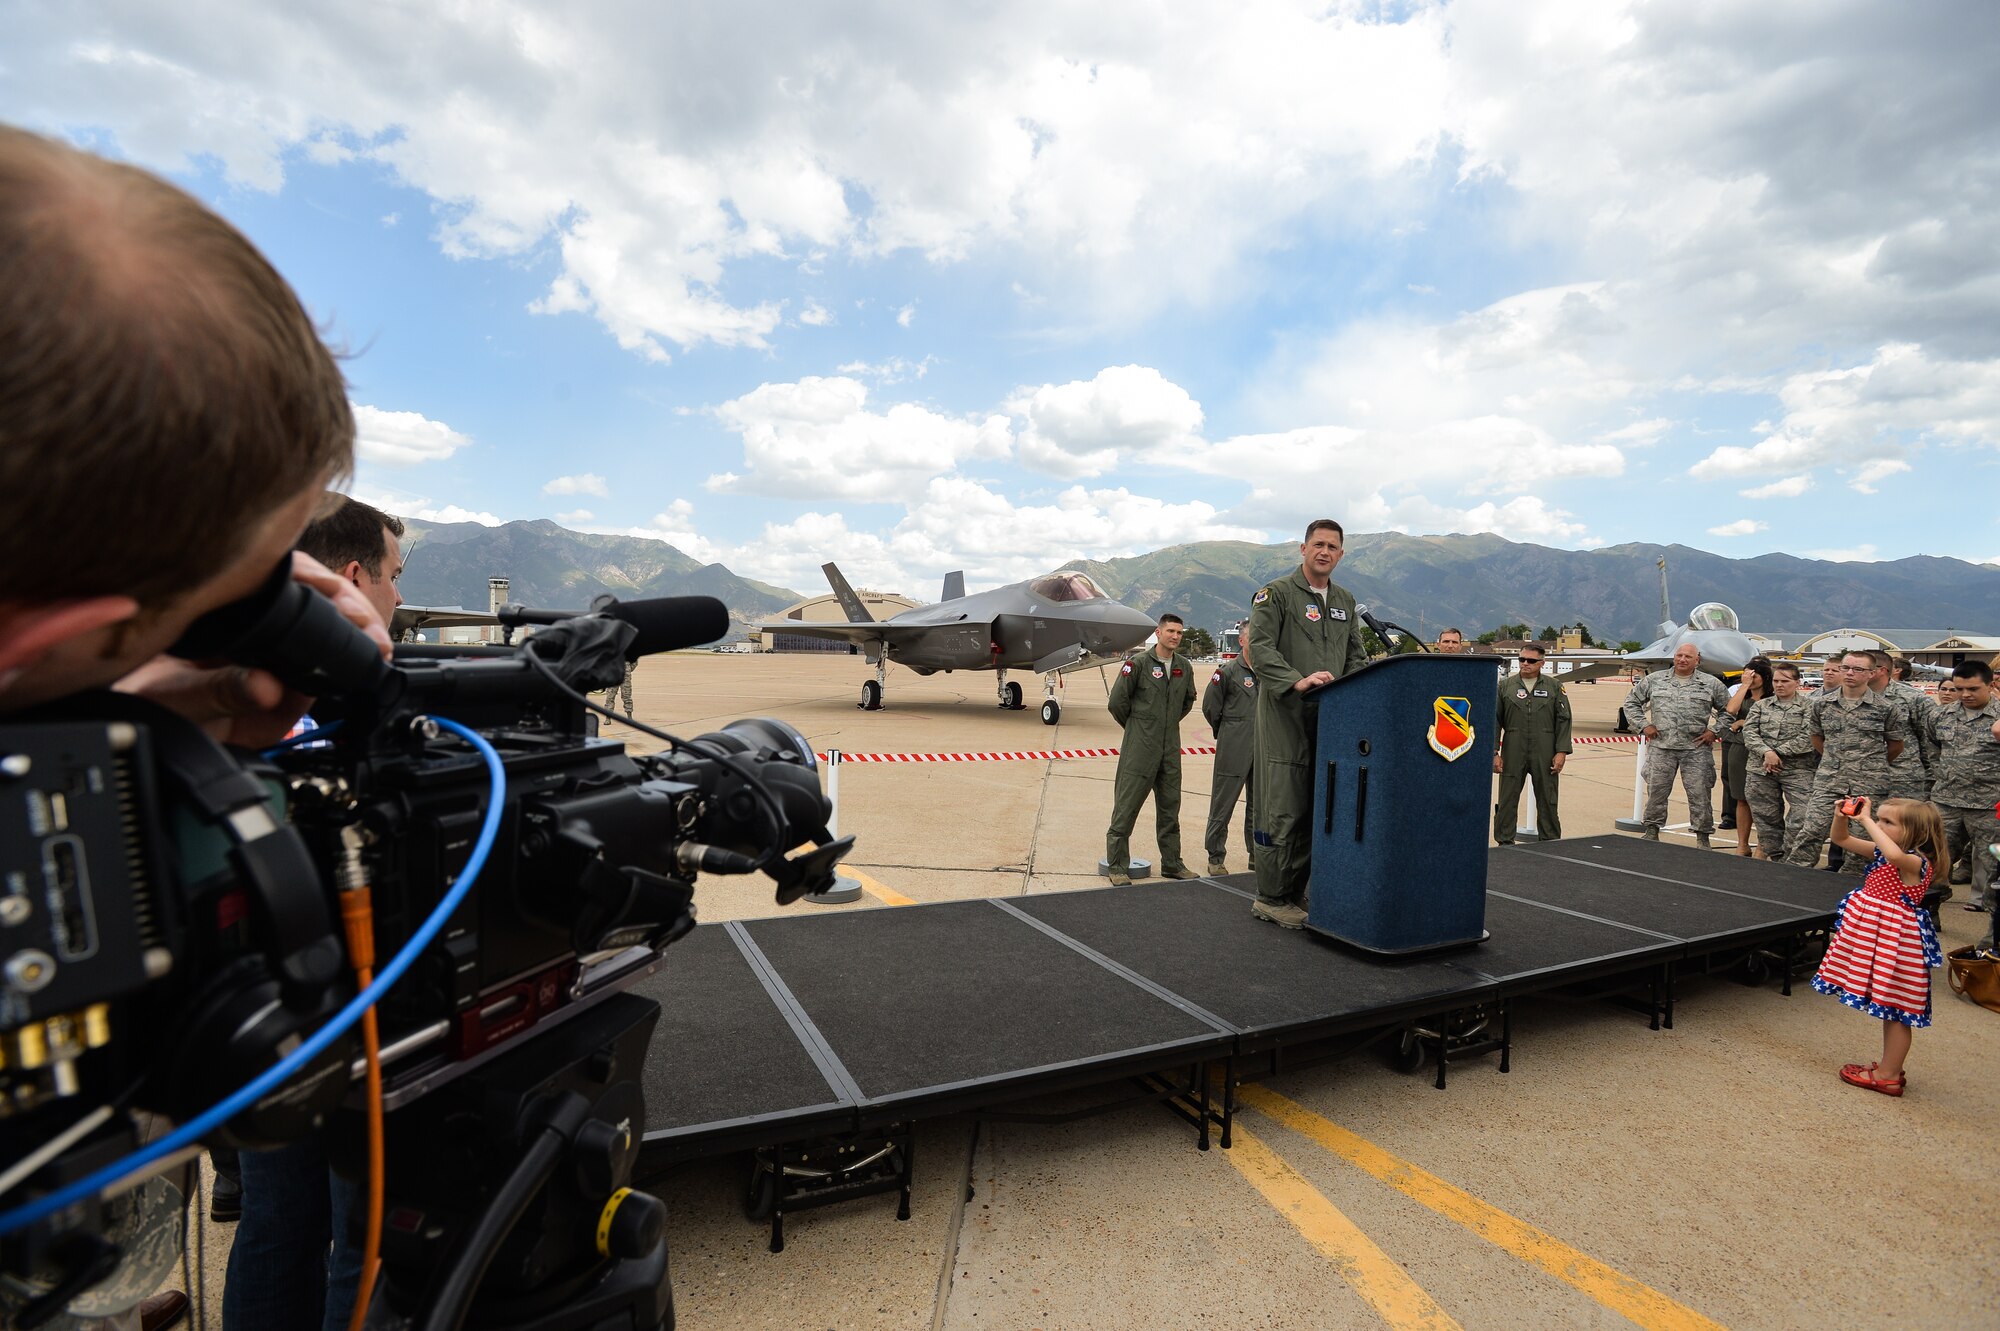 Col. David Lyons, 388th Fighter Wing commander, speaks to Airmen, family members, civic leaders and media after delivering an operational F-35A Lightning II aircraft to Hill Air Force Base, Utah, Sept. 2, 2015. Lyons, along with Lt. Col. Yosef Morris, 34th Fighter Squadron director of operations, delivered the first two jets, known as AF-77 and AF-78, at approximately 1 p.m. MDT after a 90-minute flight from the F-35 production facility in Fort Worth, Texas.  These aircraft are the first two of up to 72 jets that will be assigned to both the active-duty 388th and Reserve 419th Fighter Wings at Hill. (U.S. Air Force photo by Ron Bradshaw/Released)